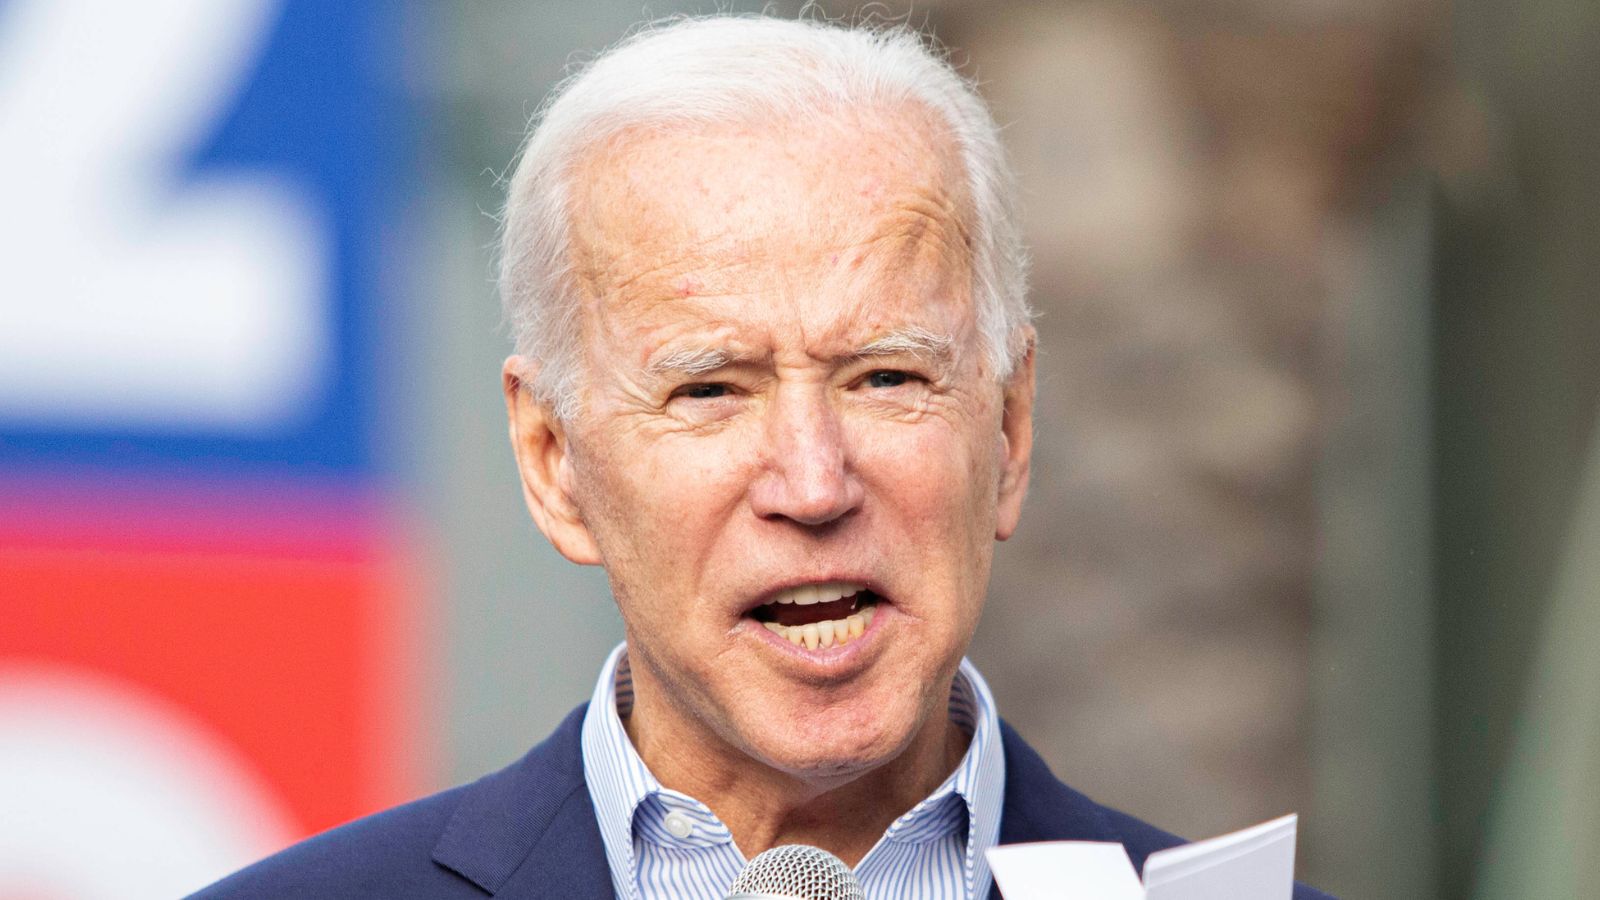 “Worst President Ever”: Poll Unveils Strong Disapproval of Biden’s Economic Strategies